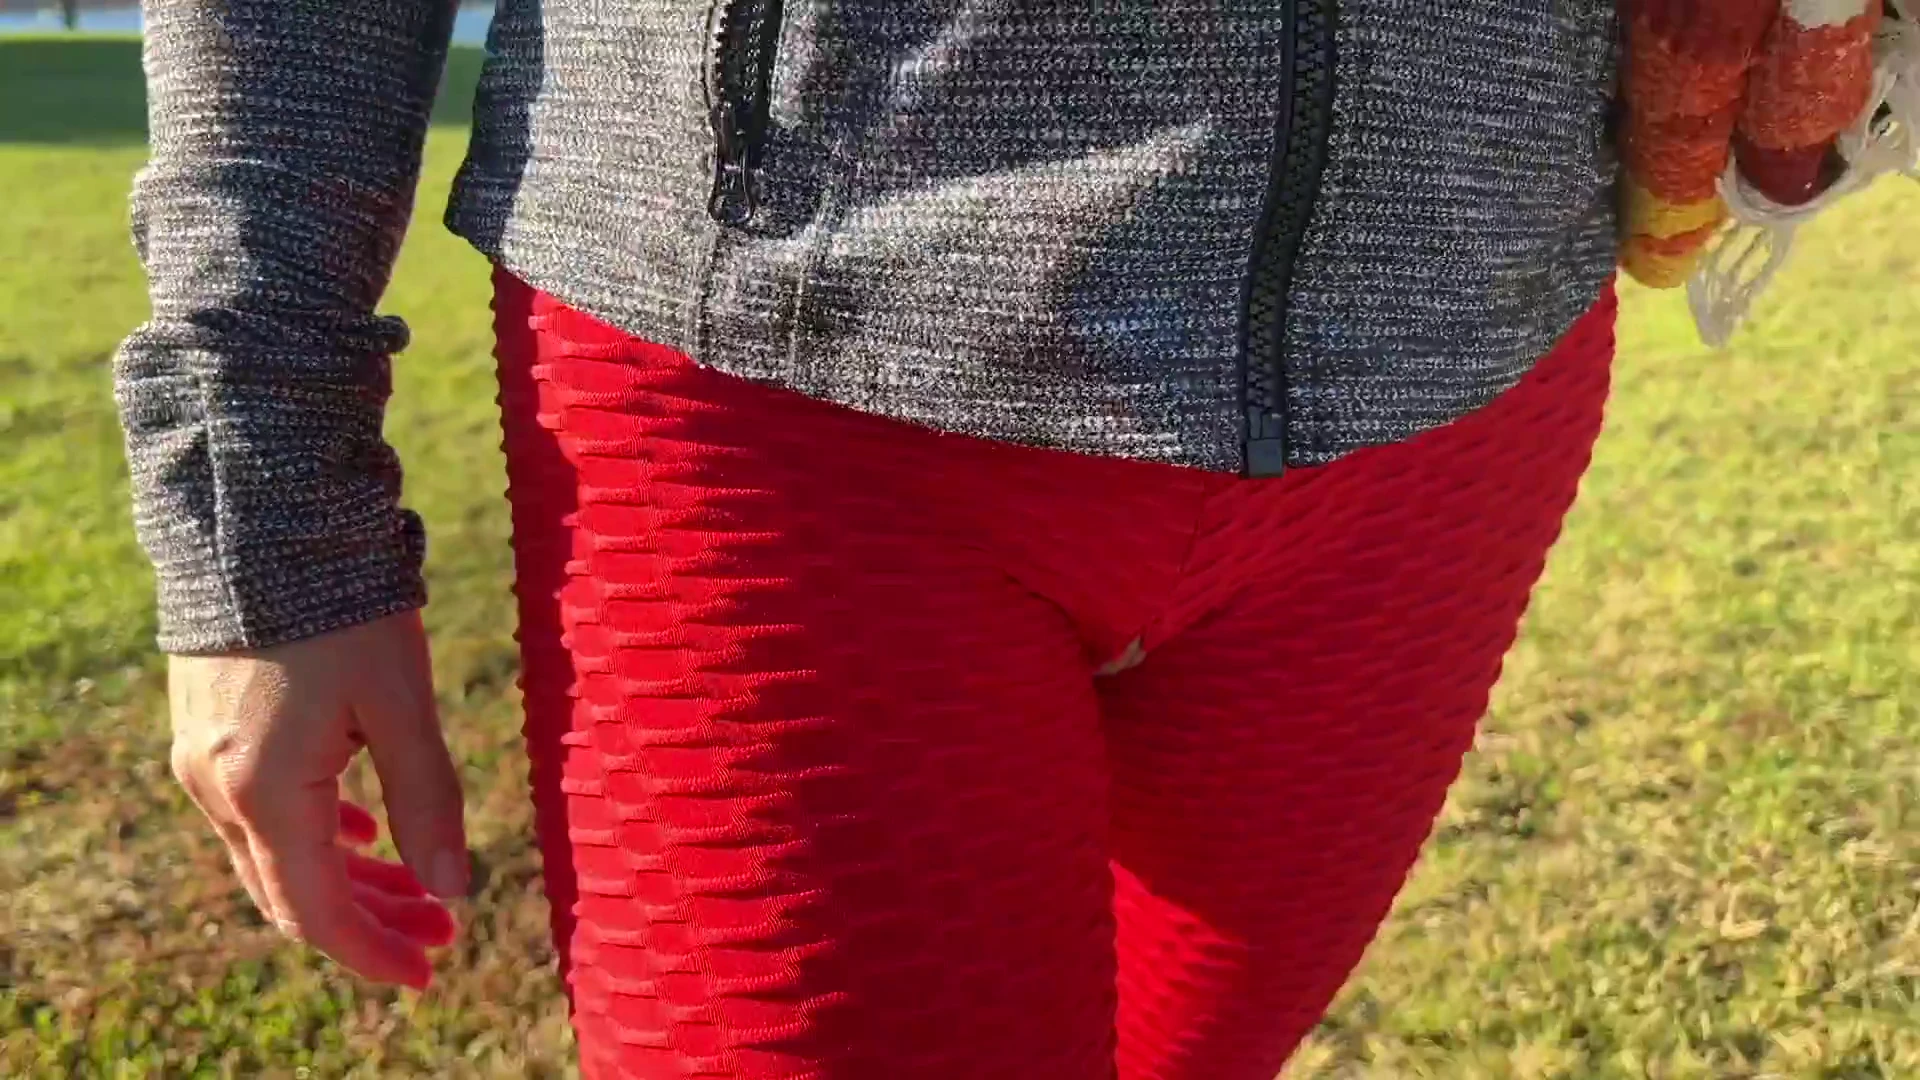 It's fun wearing these yoga pants with a hole in the crotch out in public!